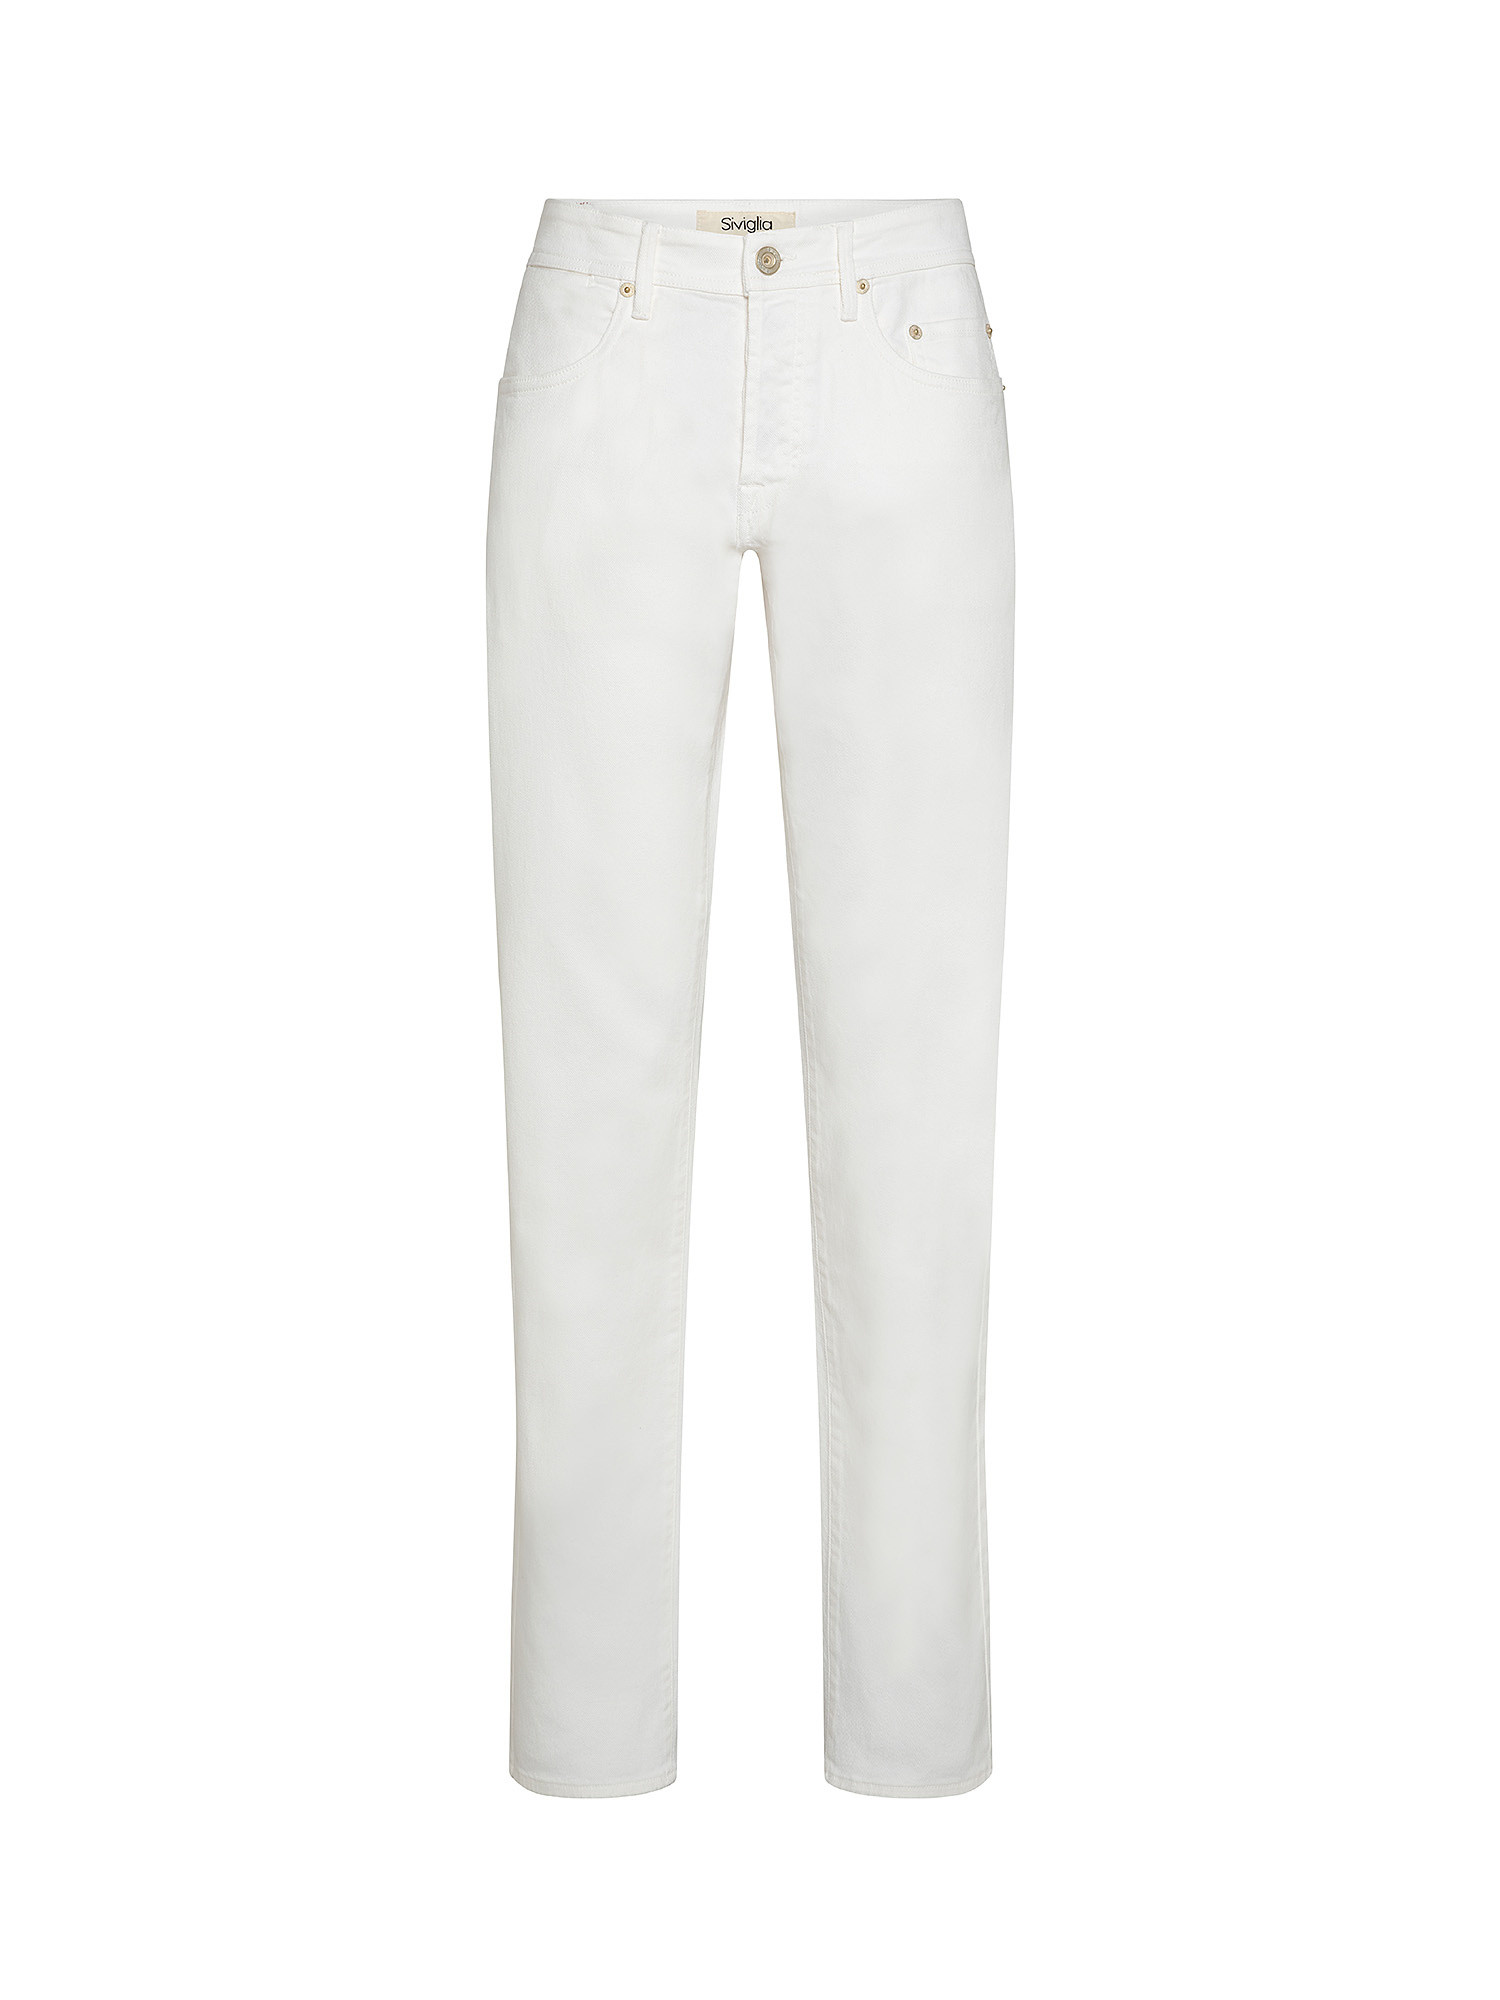 Denim trousers, White, large image number 0